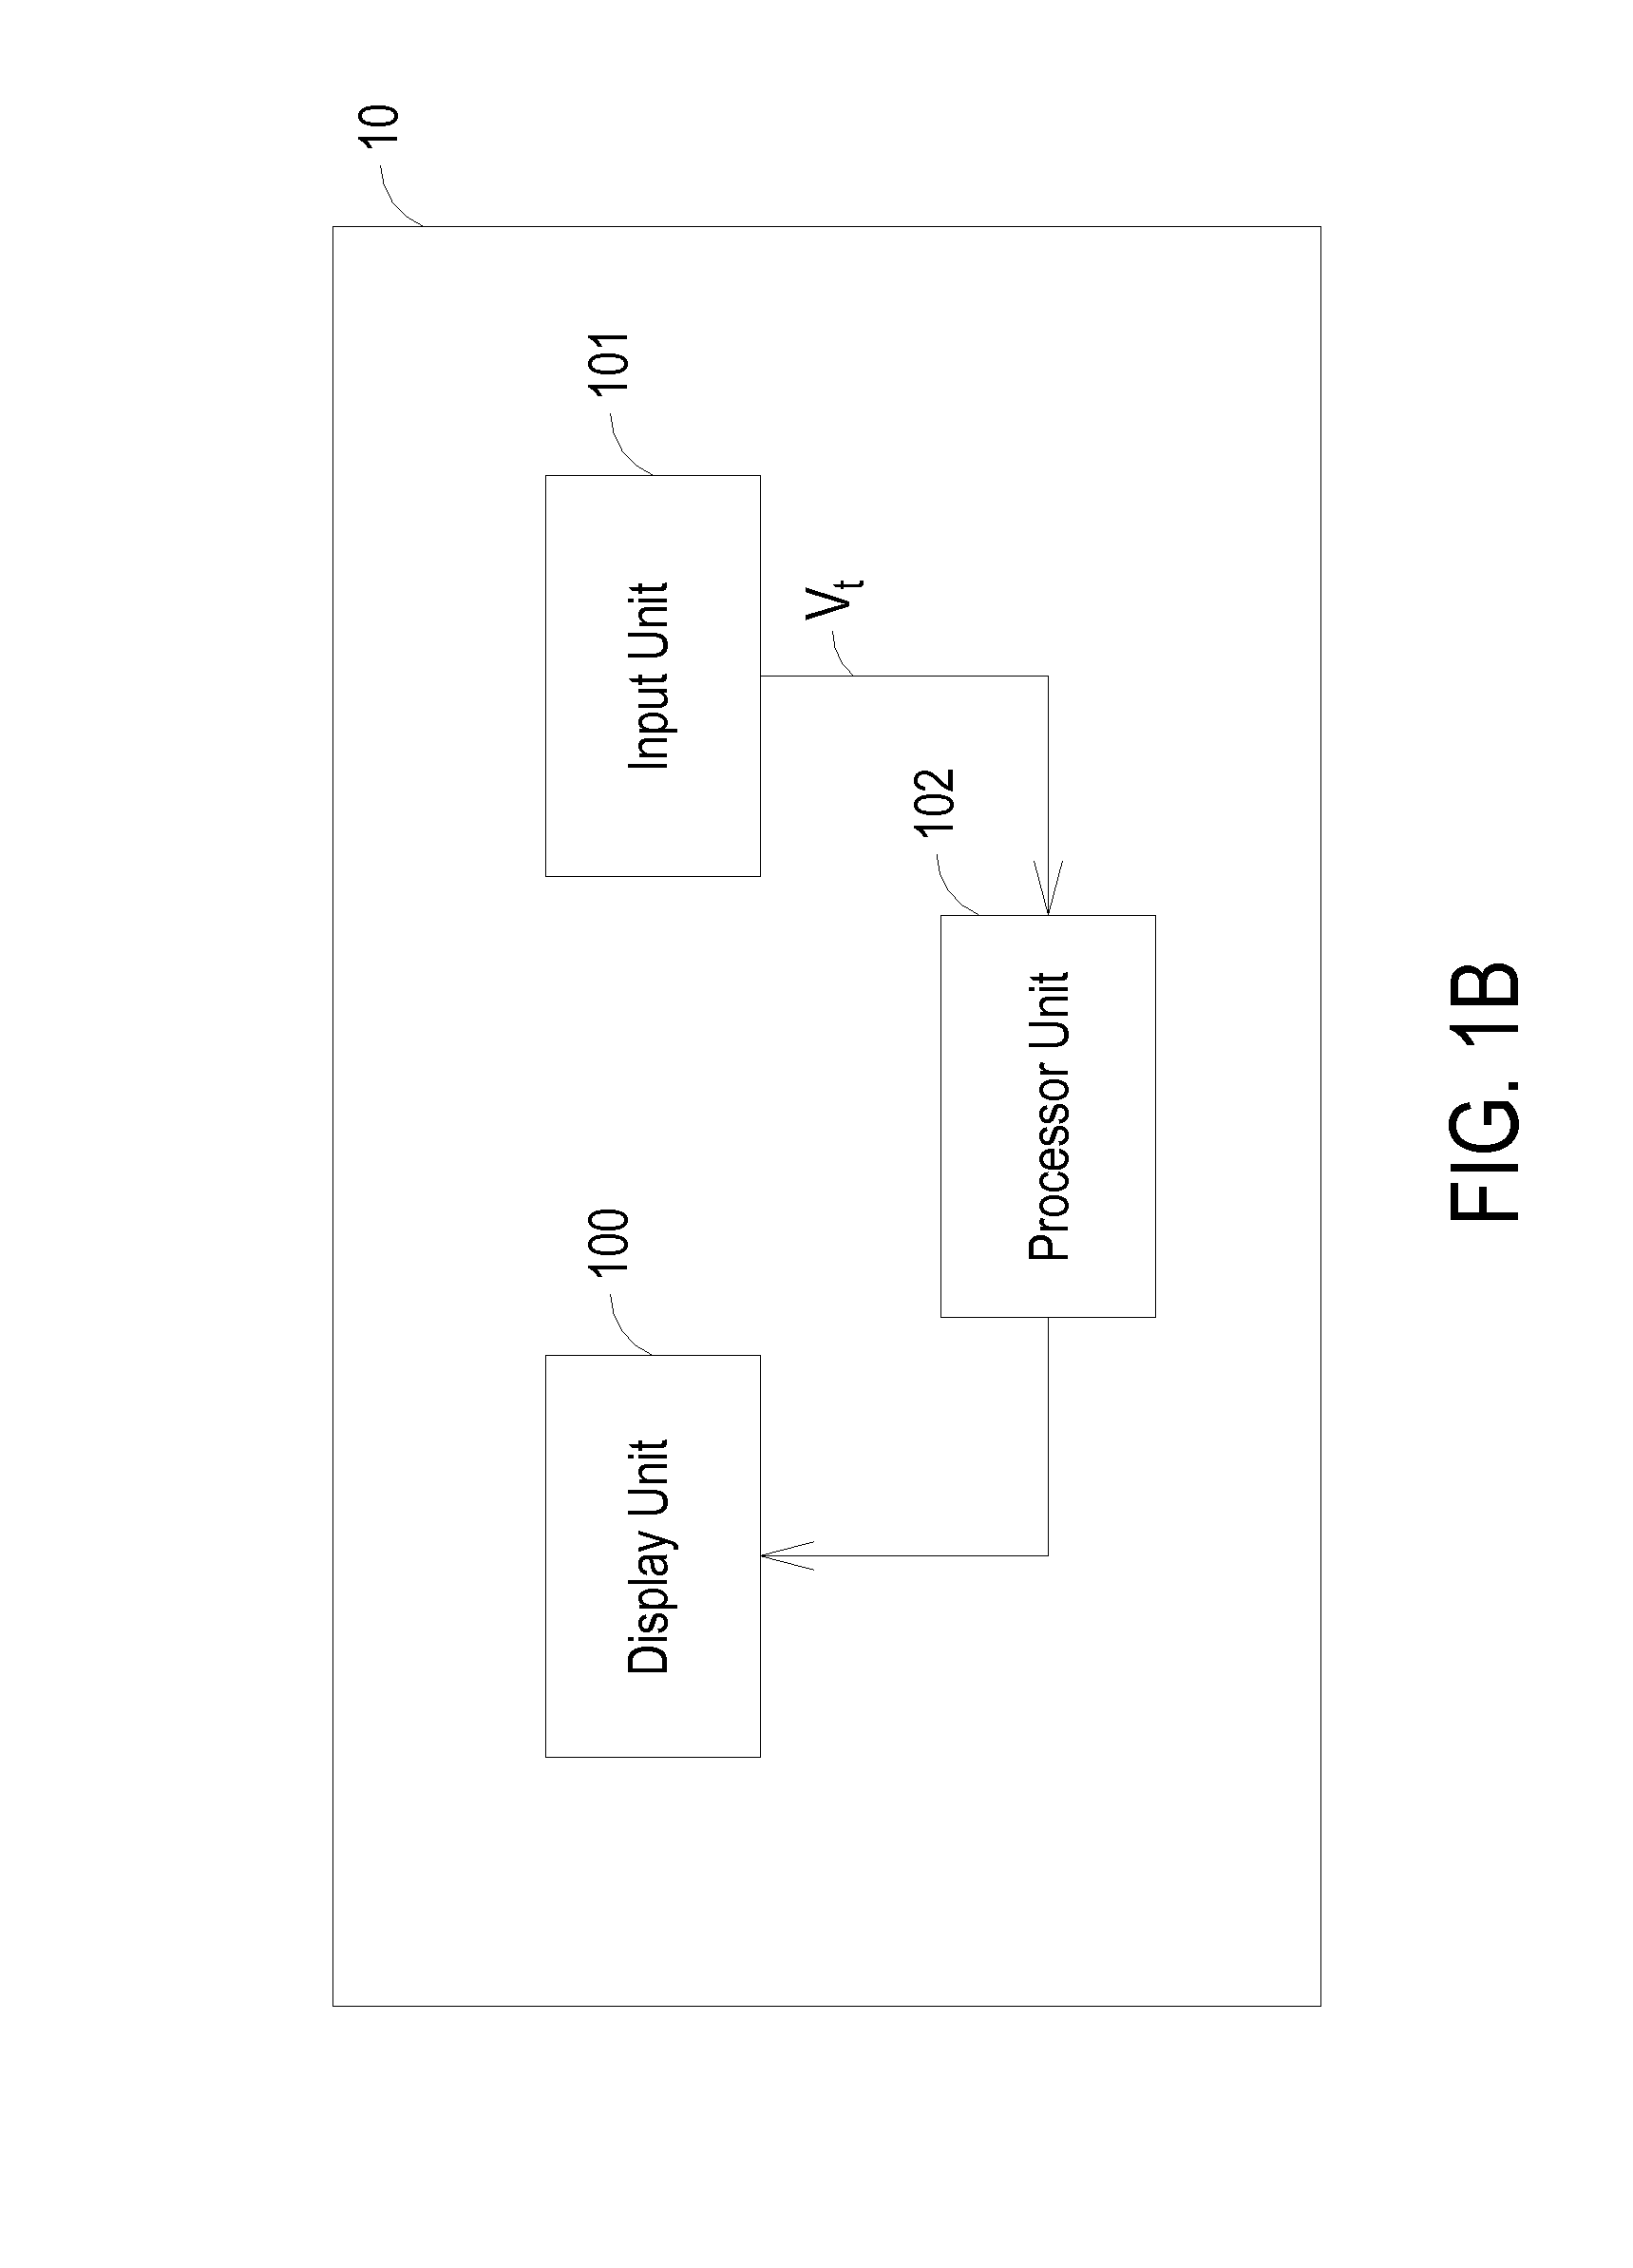 Control method for stereolithography structure